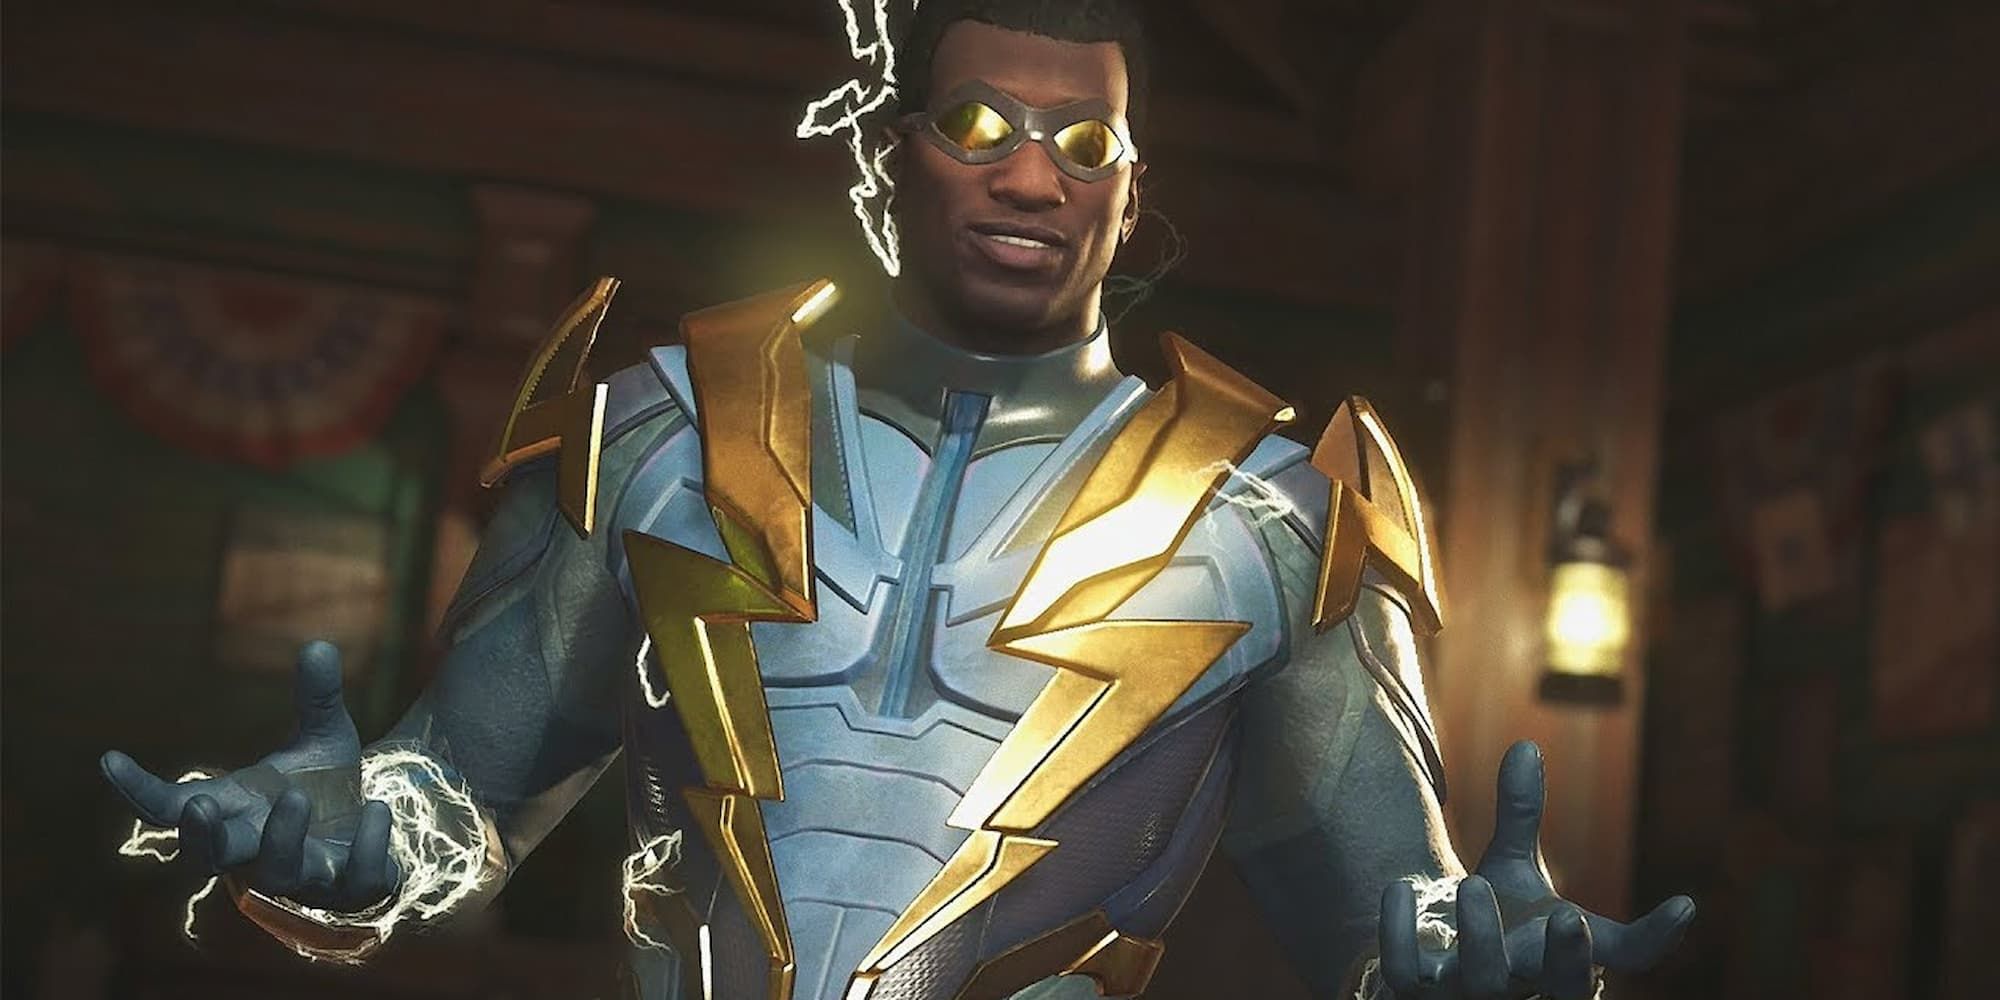 Black Lightning holds his arms out with a smirk on his face as he produces lightning around his arms and back.